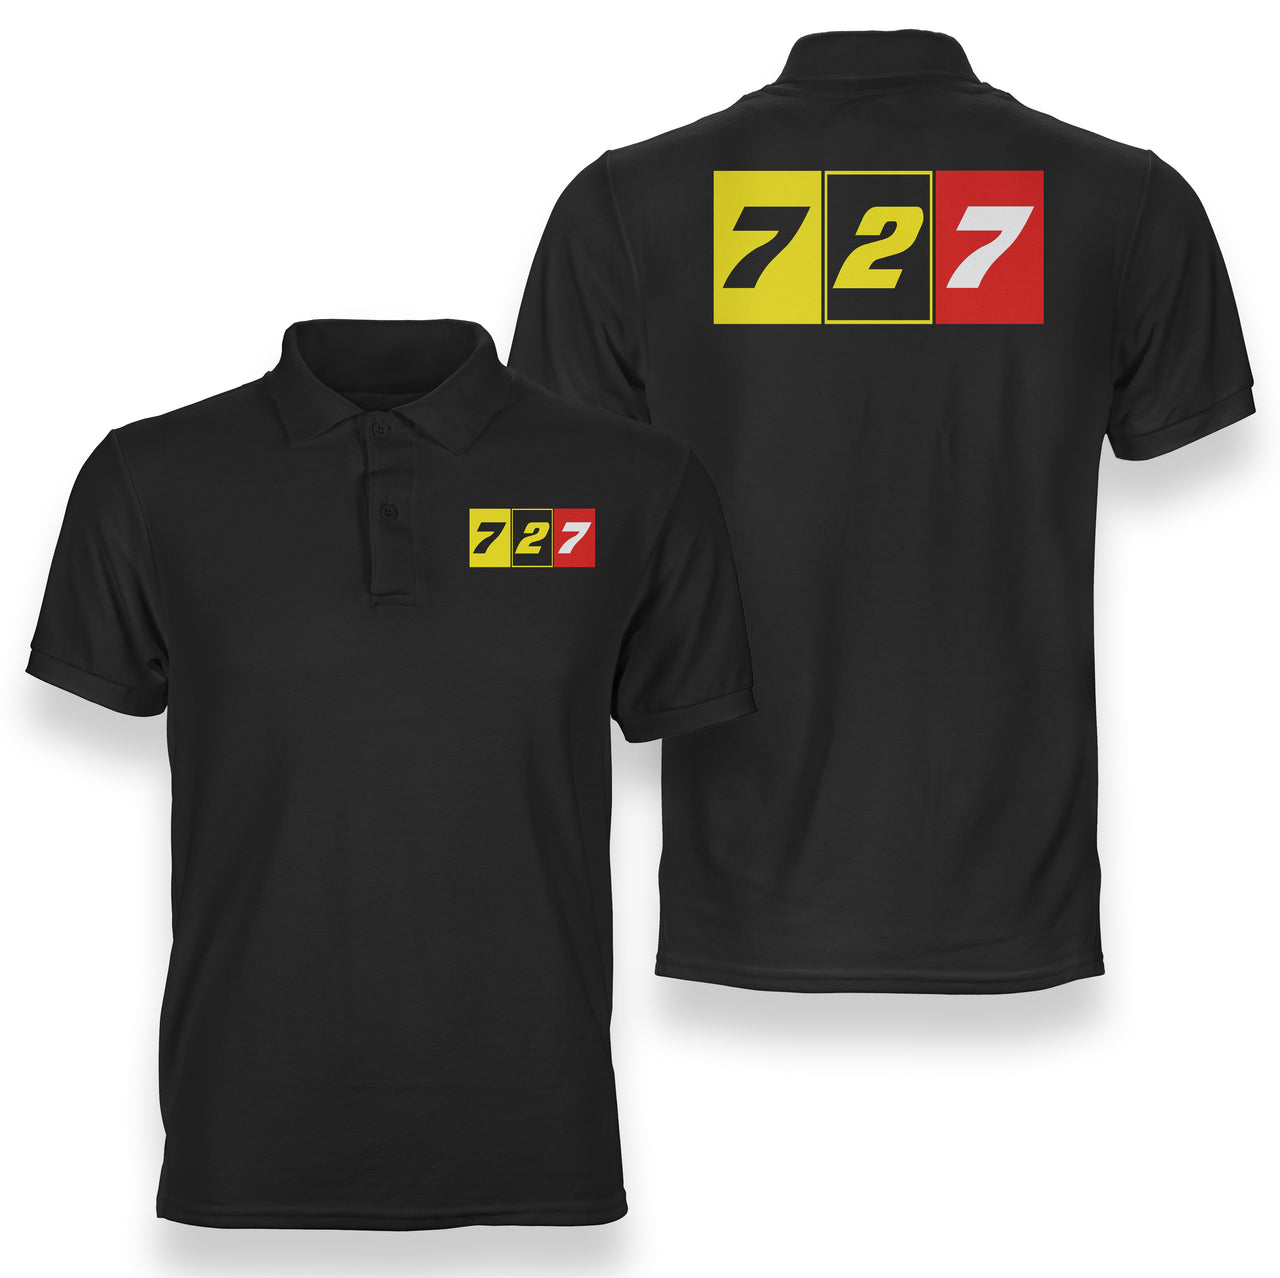 Flat Colourful 727 Designed Double Side Polo T-Shirts